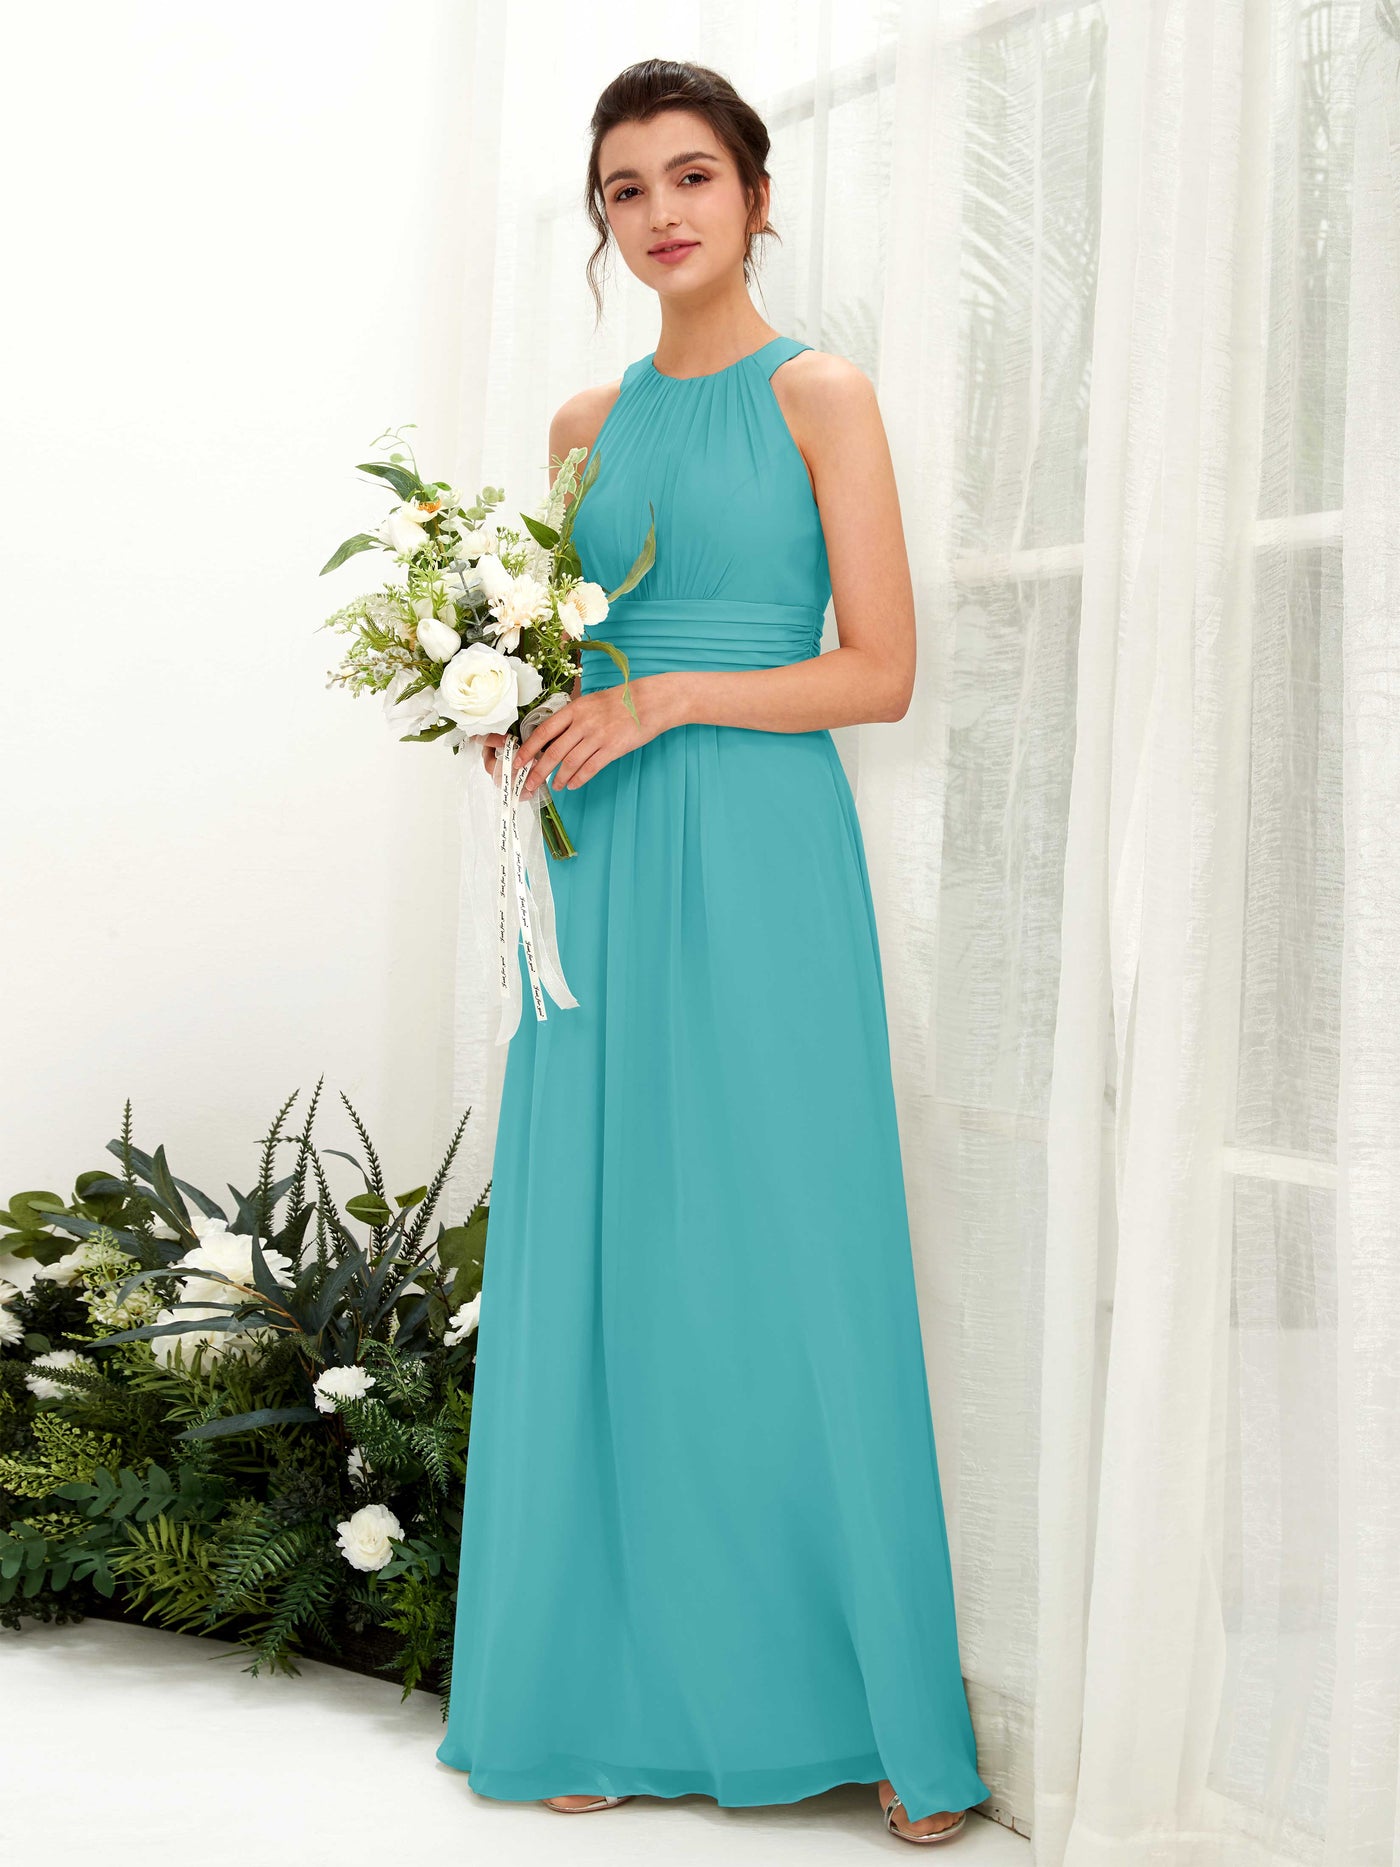 Turquoise Bridesmaid Dresses Bridesmaid Dress A-line Chiffon Halter Full Length Sleeveless Wedding Party Dress (81221523)#color_turquoise